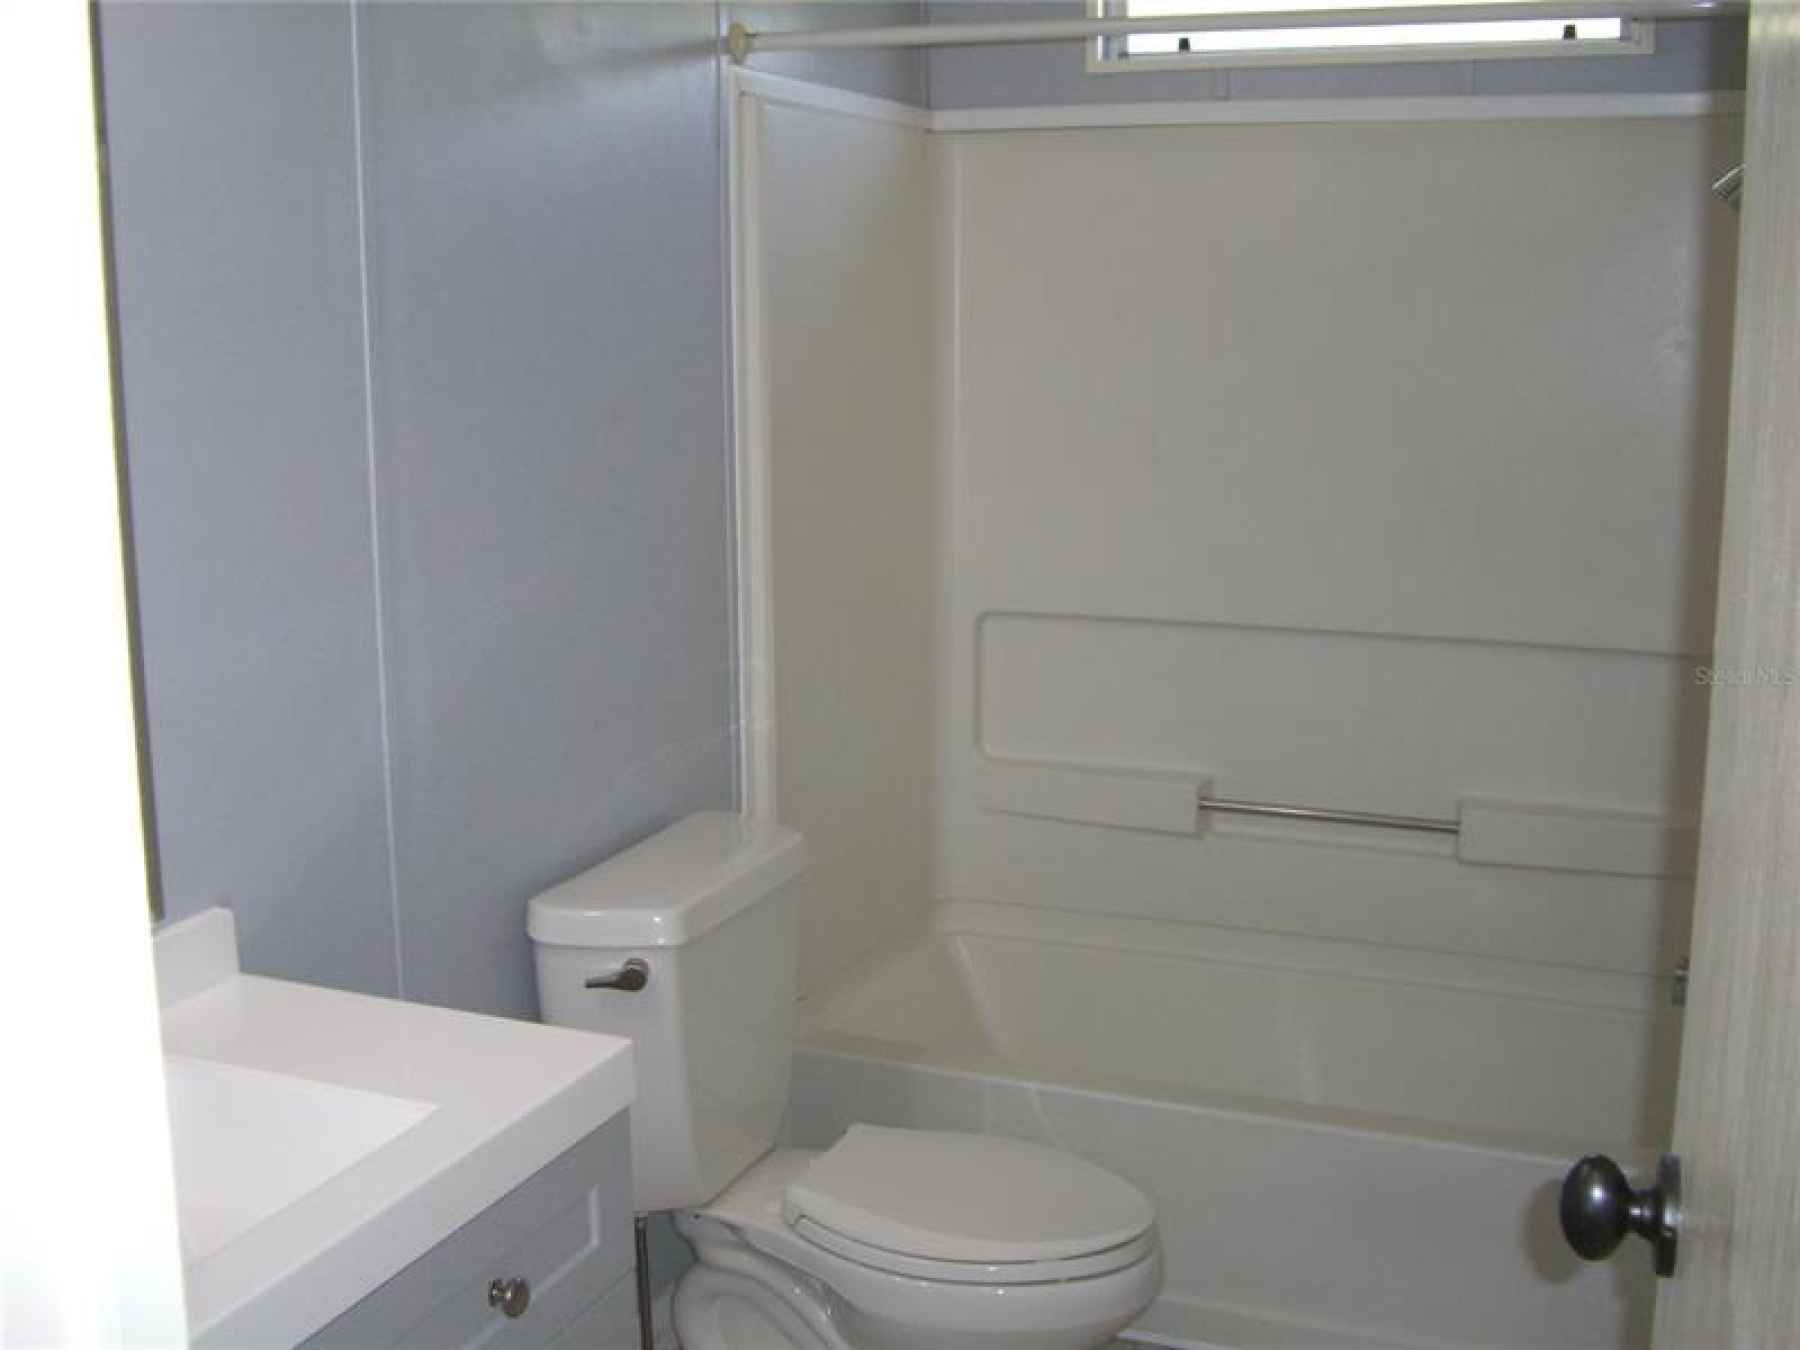 GUEST BATH HAS TUB AND SHOWER